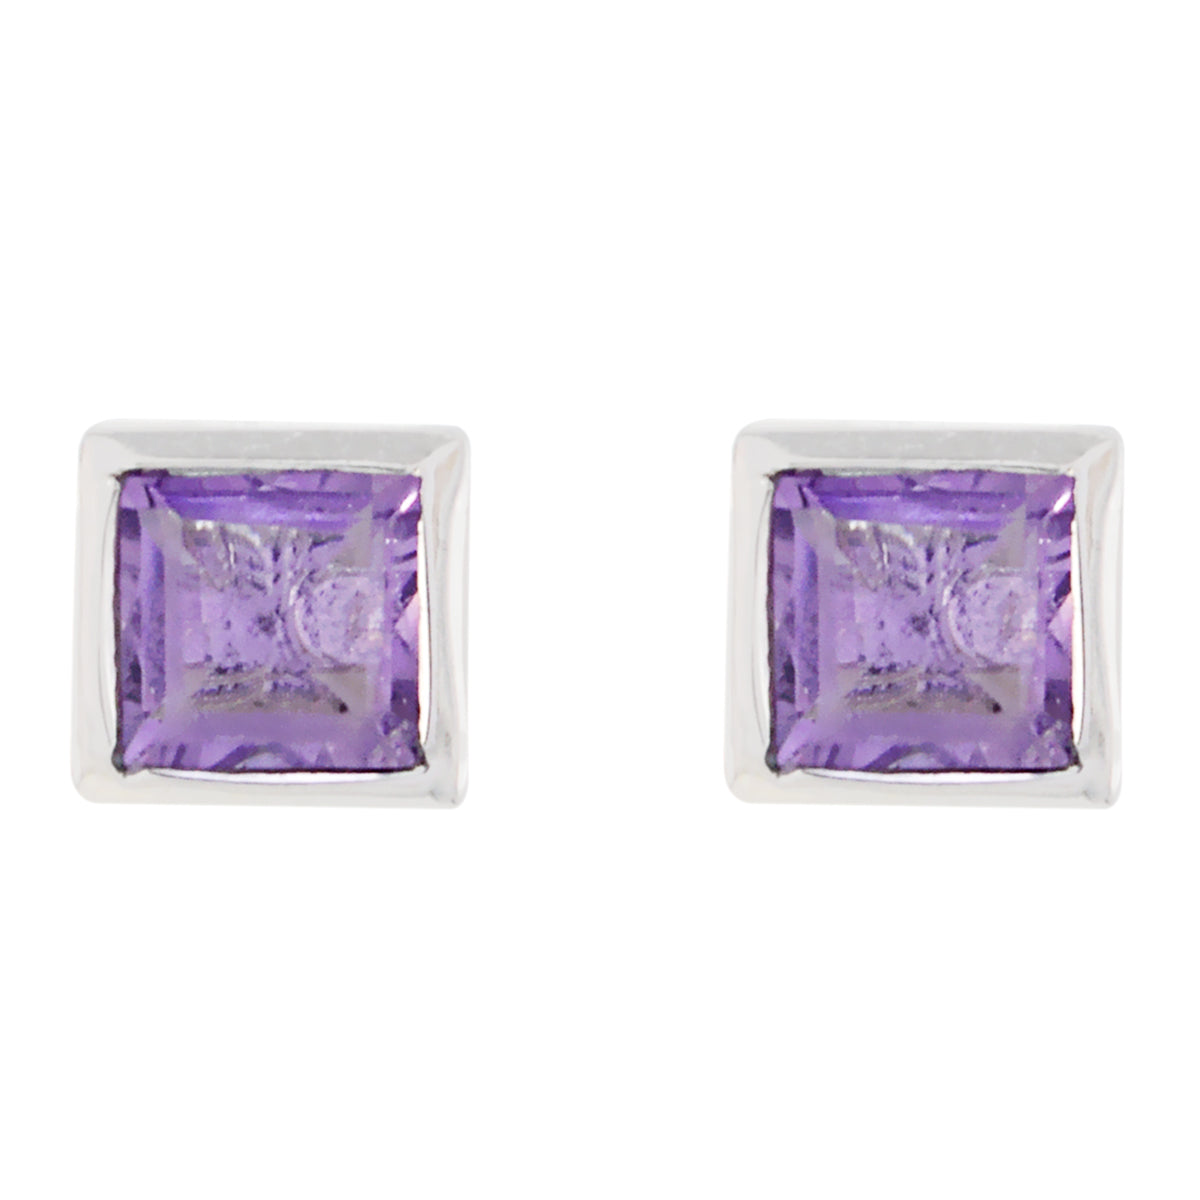 Riyo Nice Gemstone square Faceted Purple Amethyst Silver Earring gift for graduation